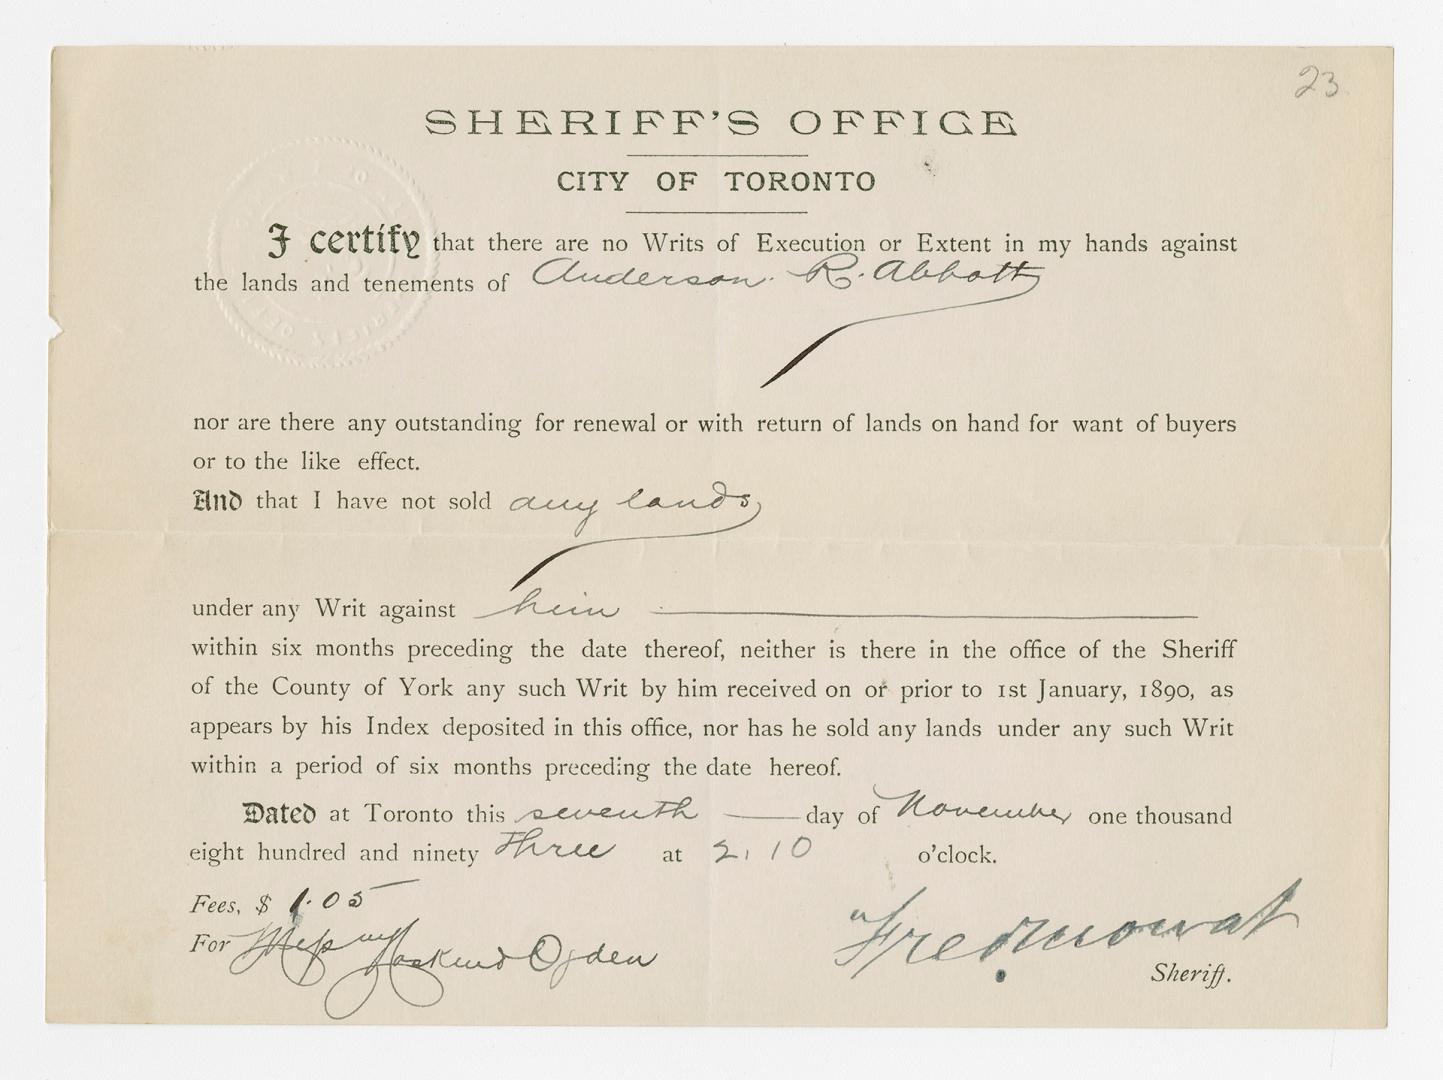 City of Toronto Sheriff’s Office – certification of no Writs of Execution or Extent against lands and tenements of Anderson Ruffin Abbott.